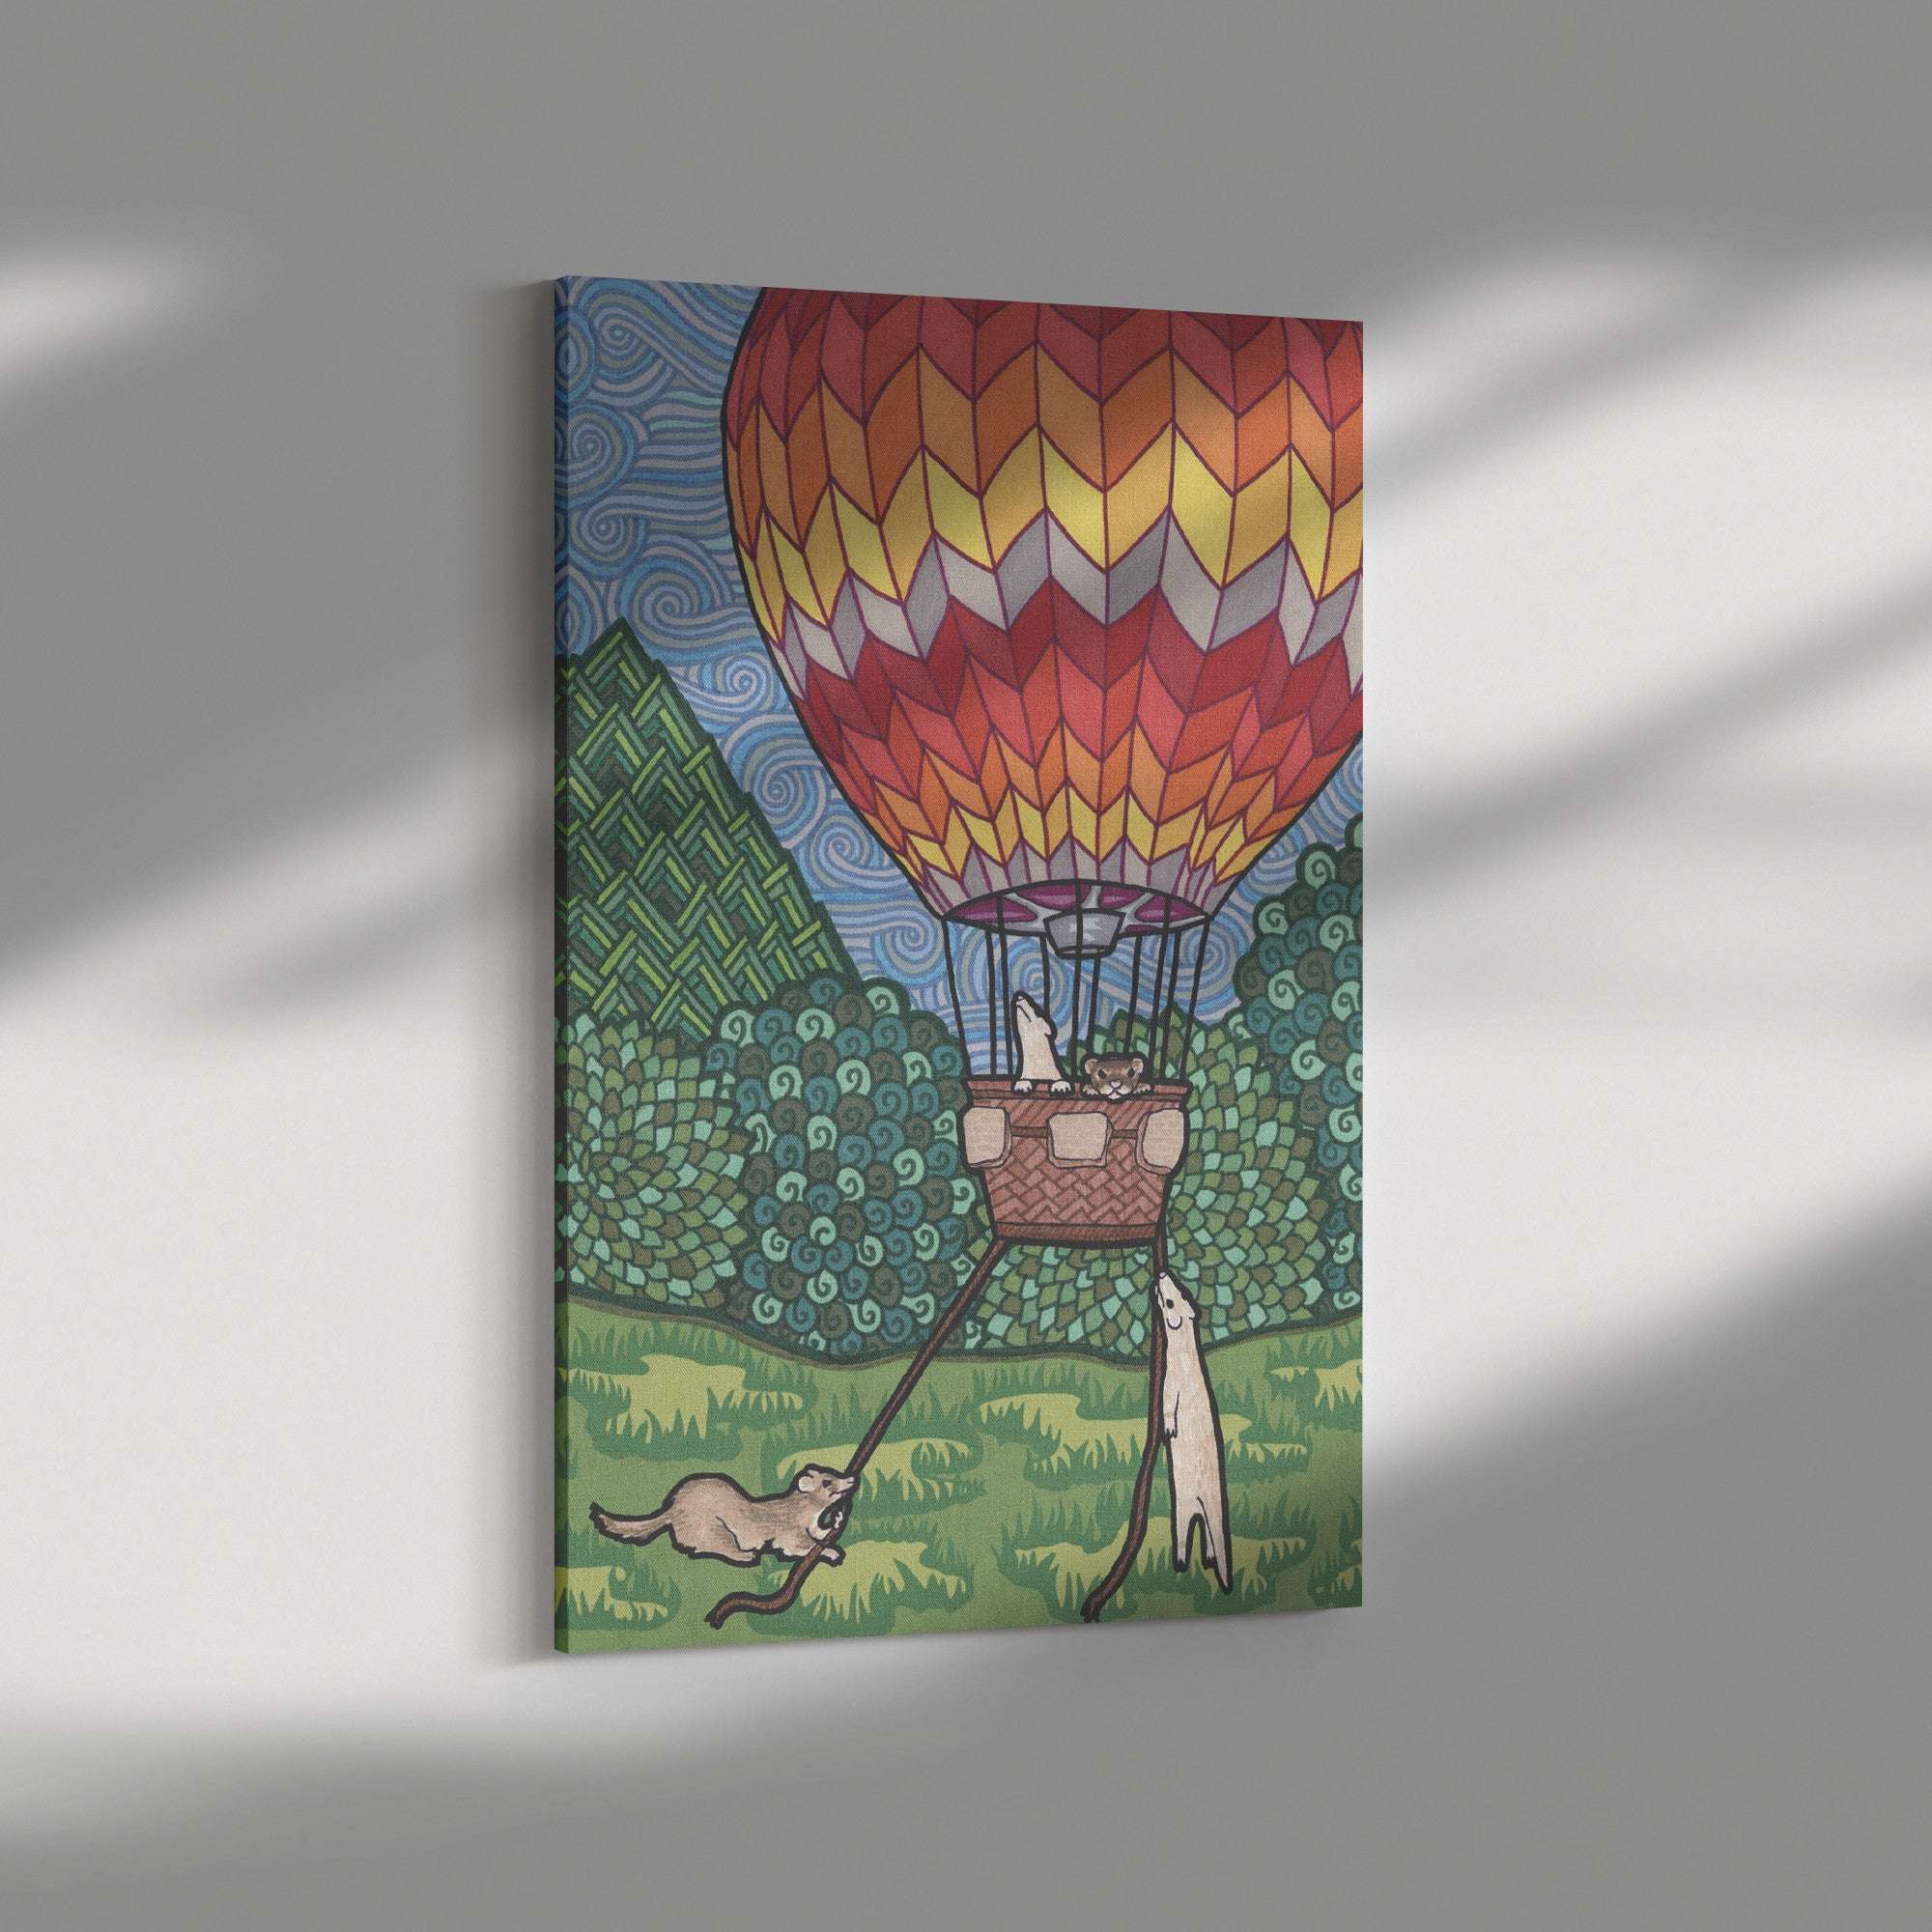 A Ferret Flight Canvas Print depicting a colorful hot air balloon with ferrets in the basket, perfect to decorate a kids room.